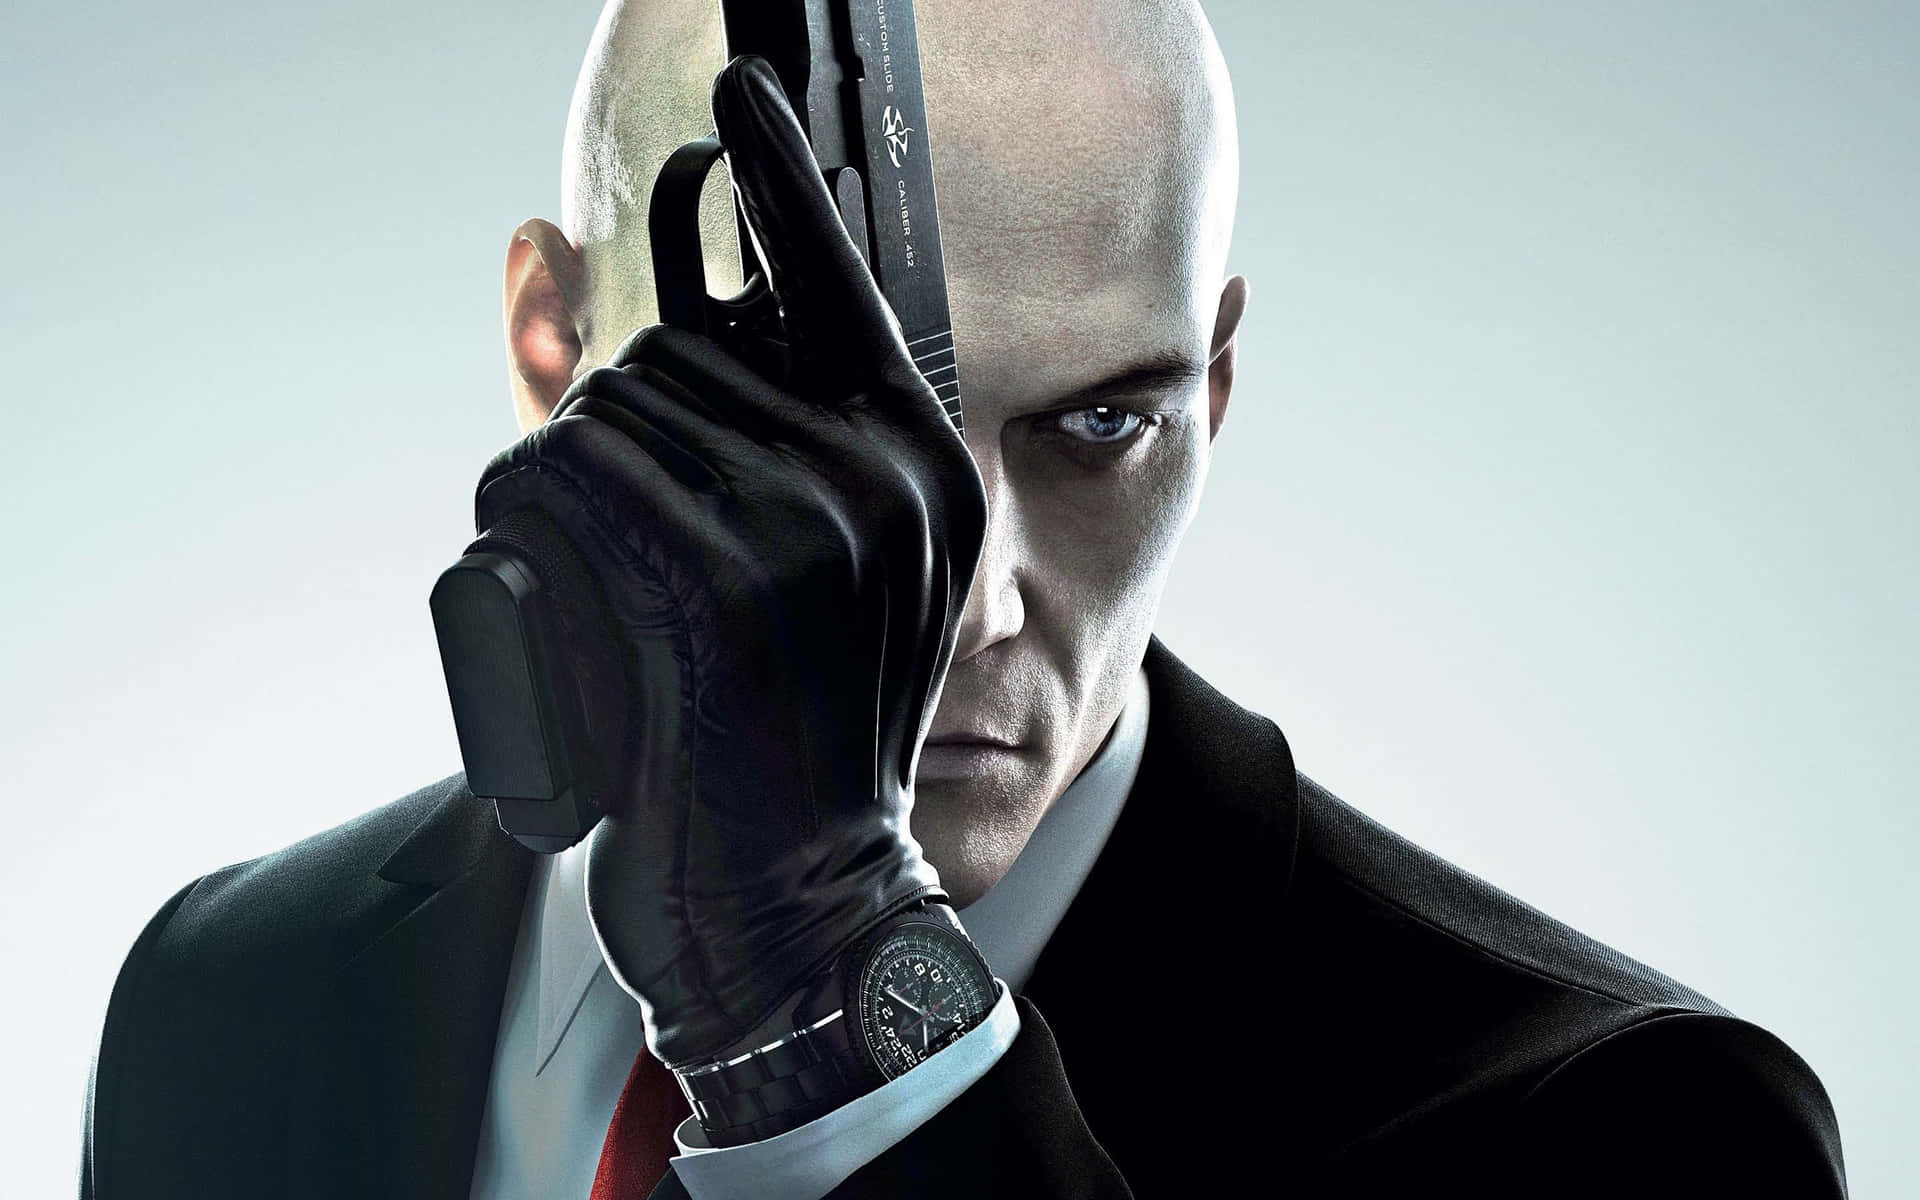 Hitman Agent 47 Covering Face With Gun Wallpaper